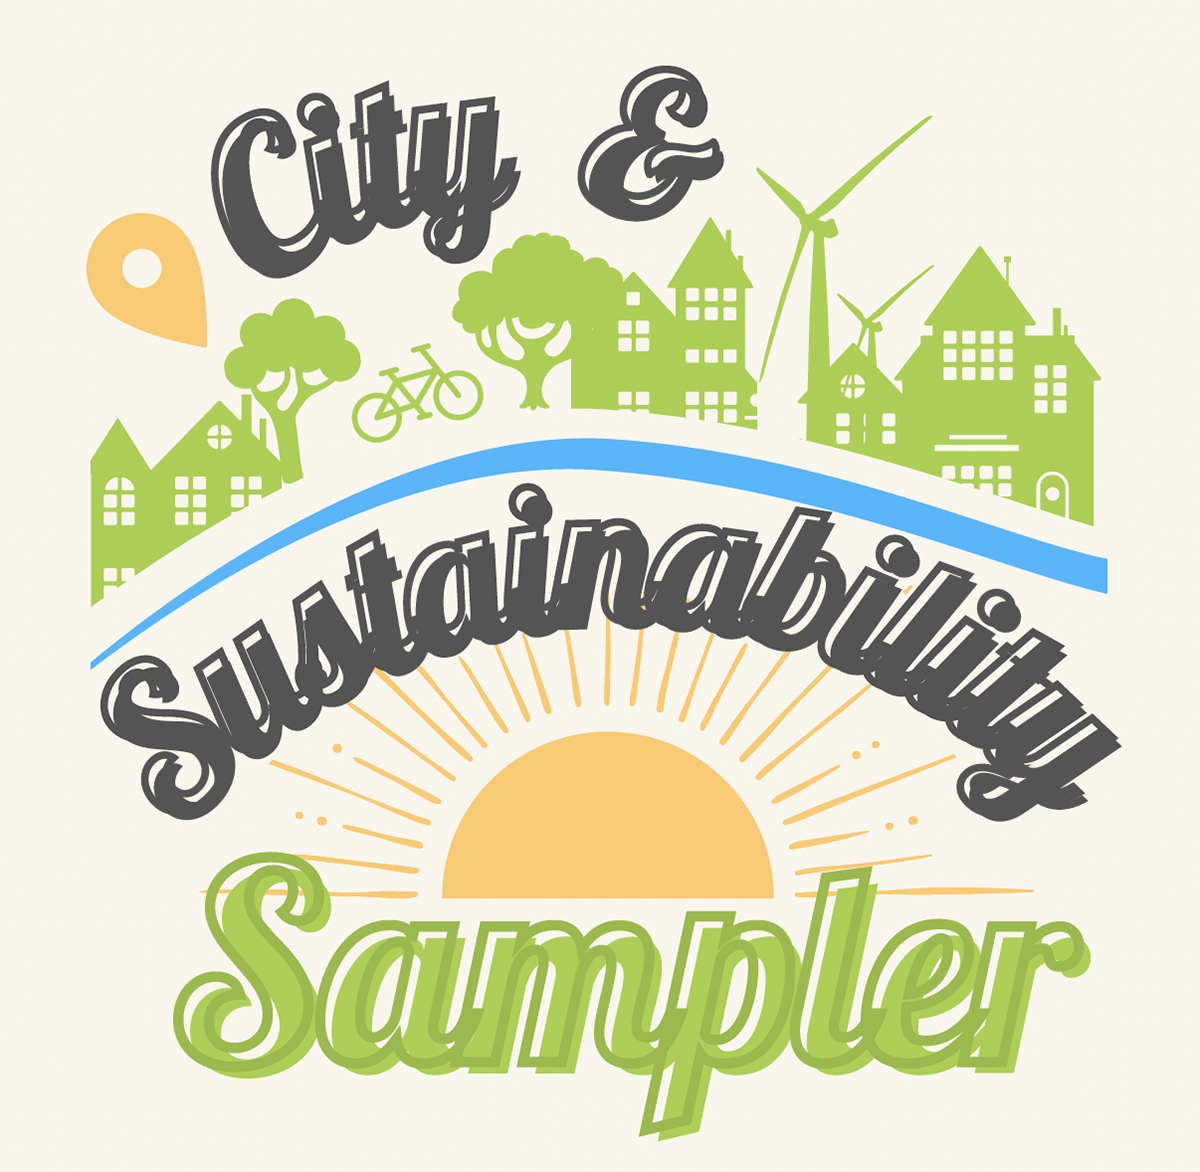 City and Sustainability Sampler